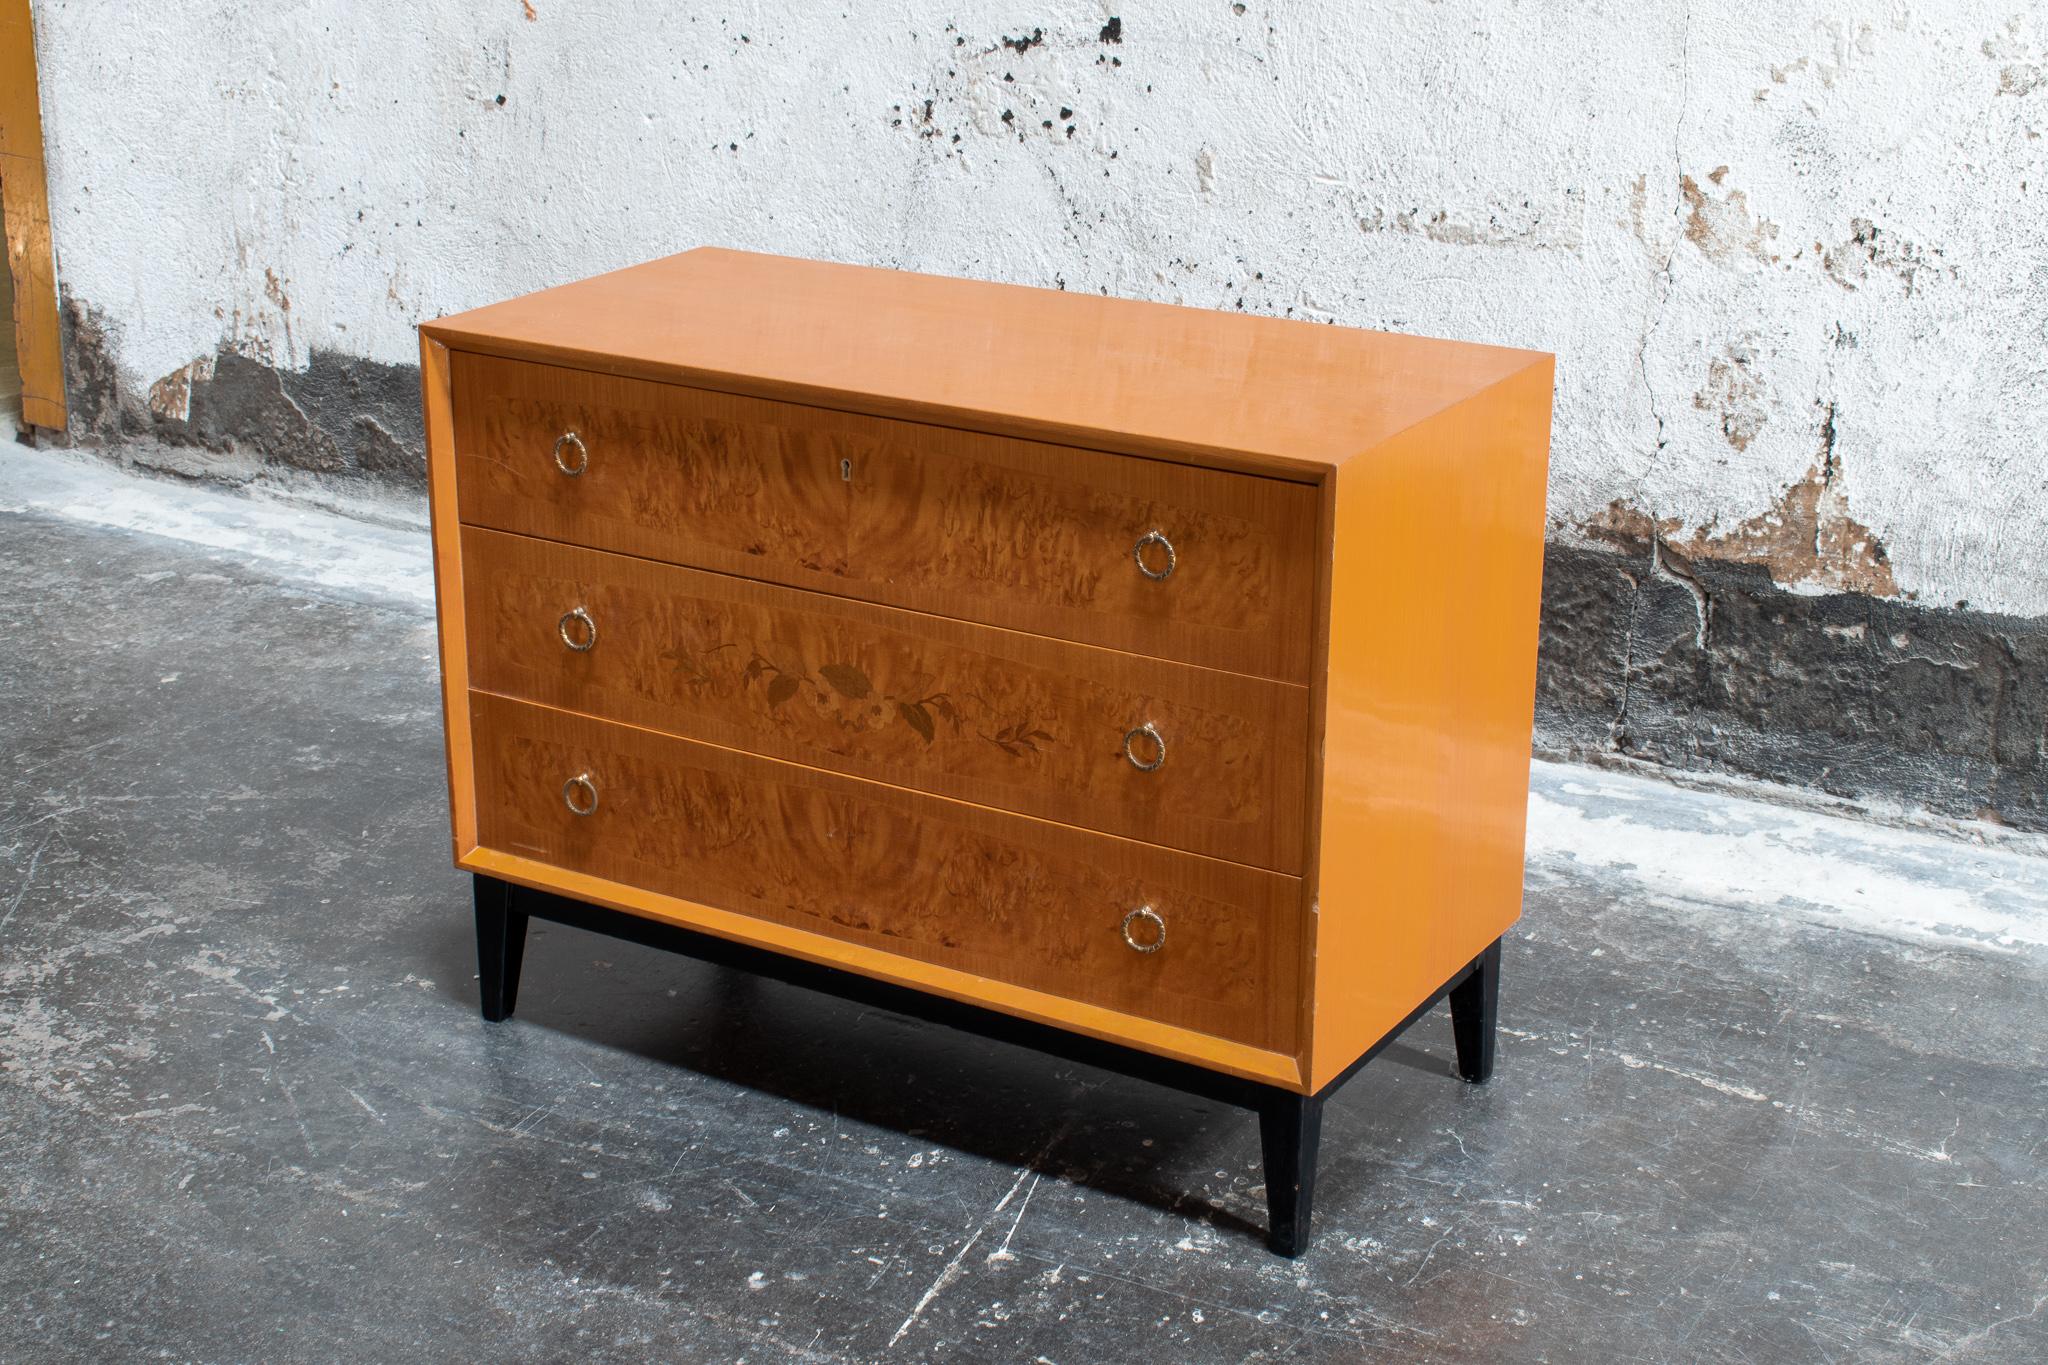 Art Deco Chest of Drawers in Golden Flame Birch with Intarsia Inlay and Ebonized Base